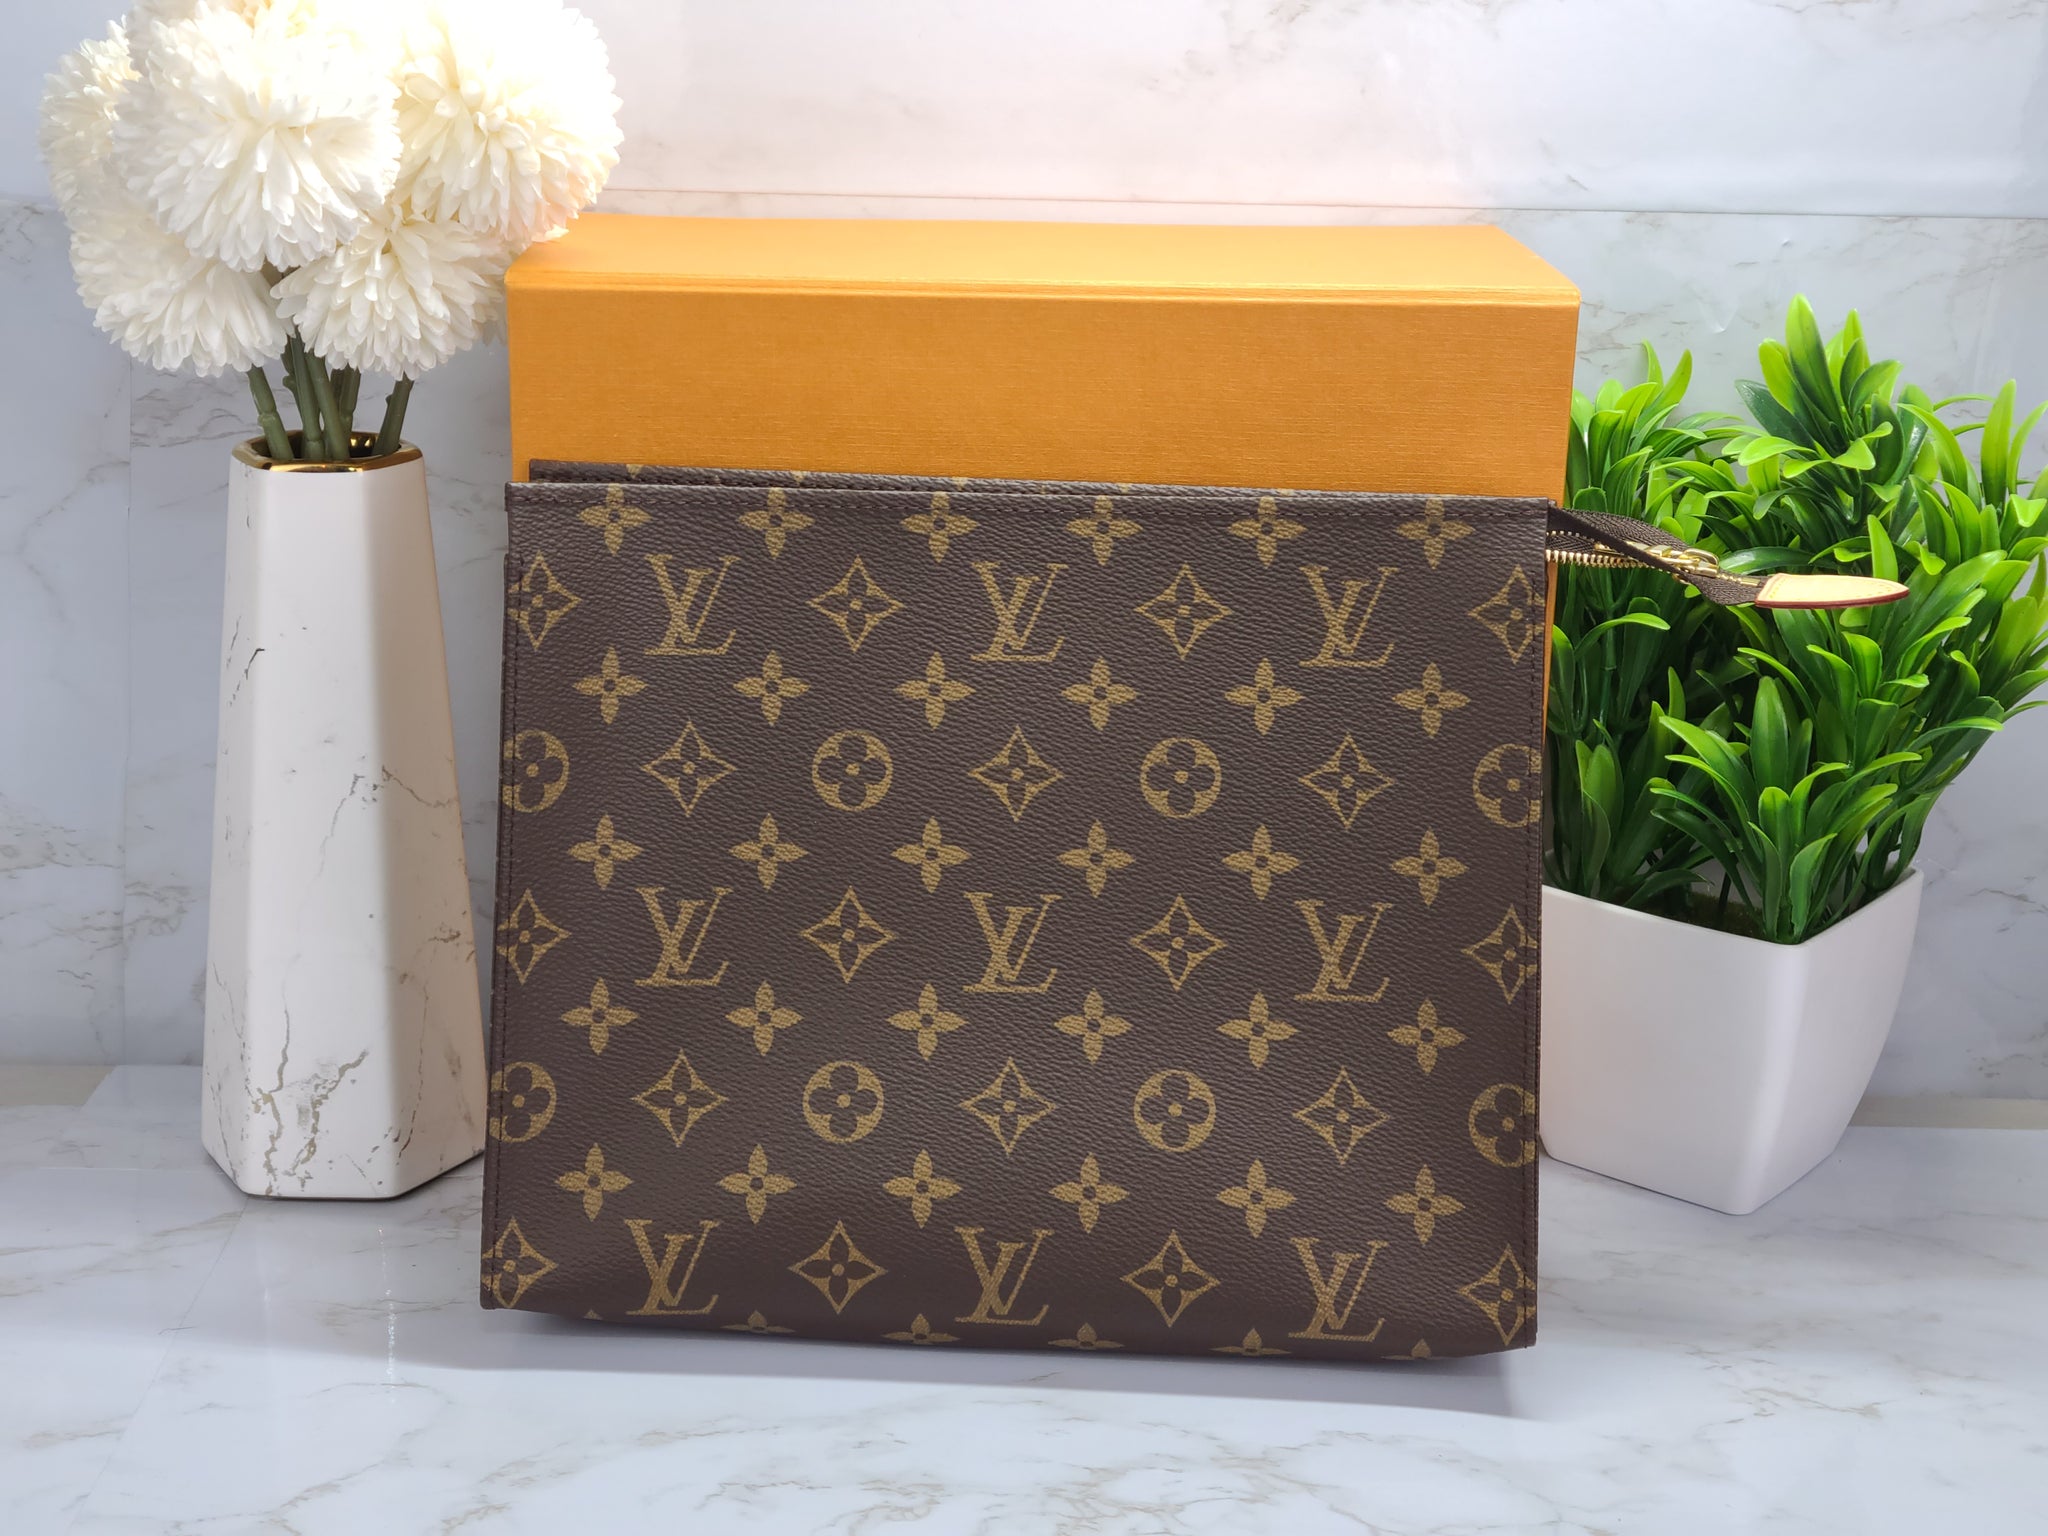 How to dress your Louis Vuitton Speedy 30, Toiletry 26